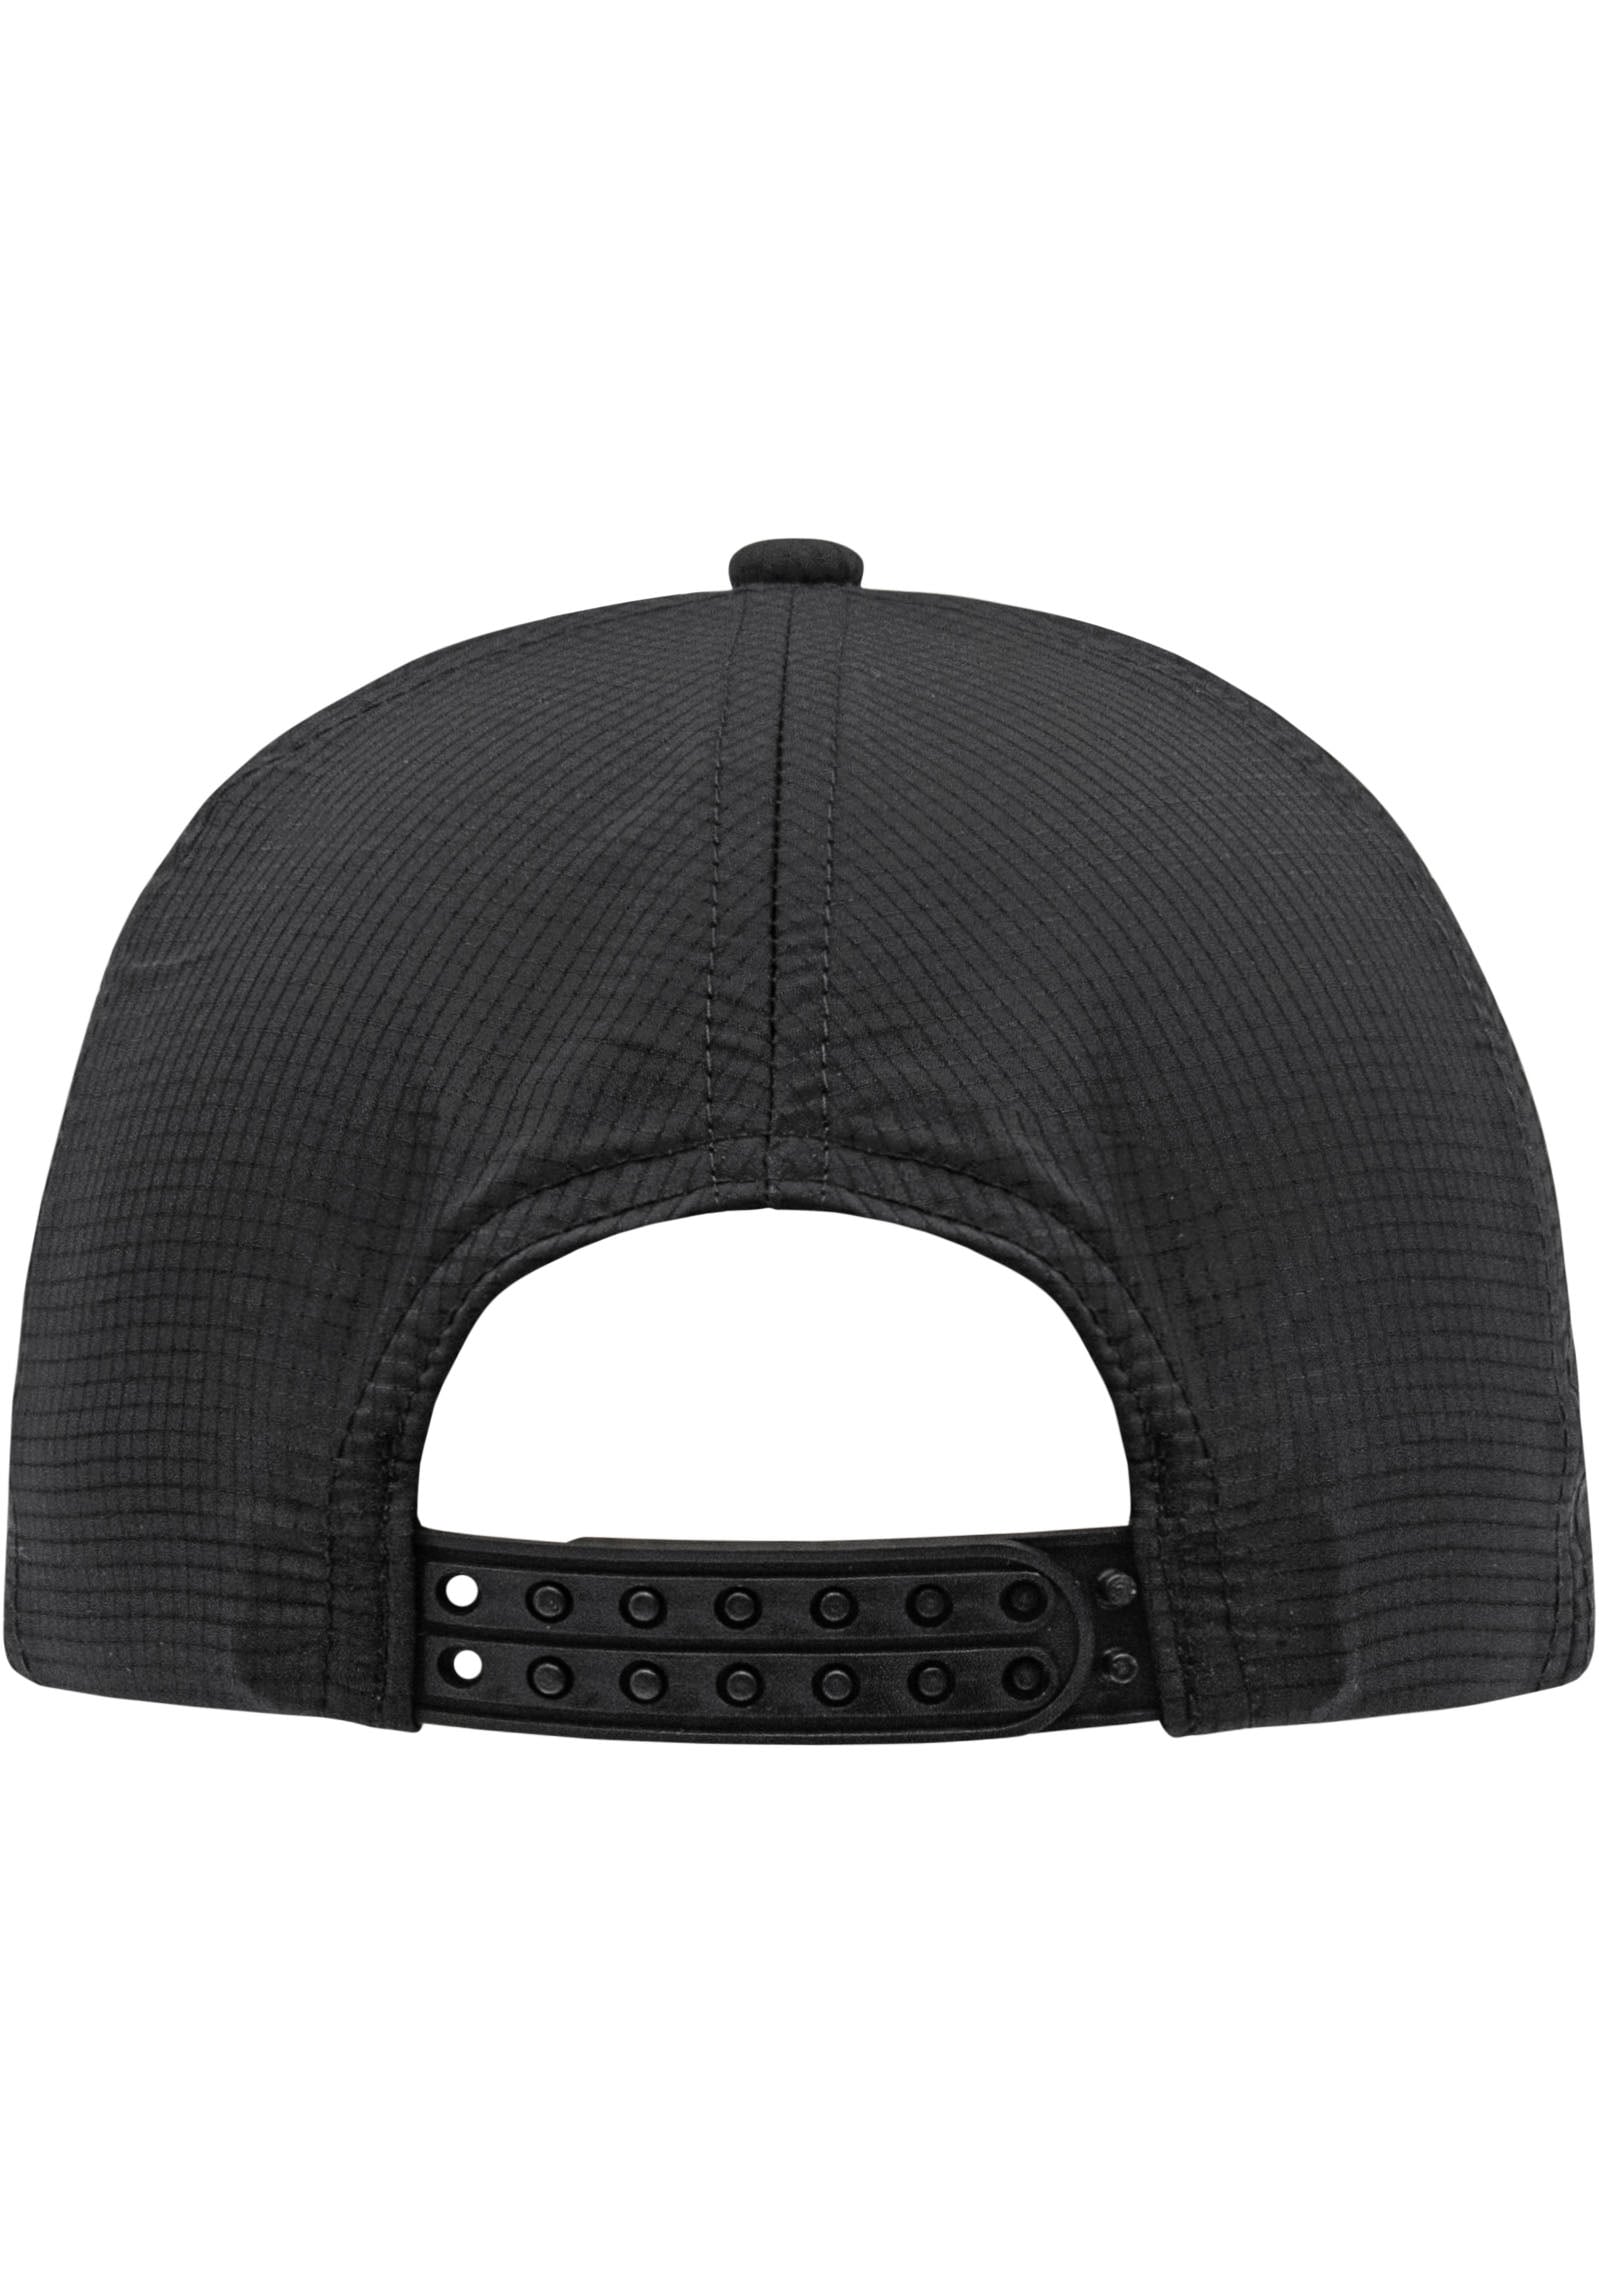 chillouts Baseball UNIVERSAL Cap, bei online Hat Langley